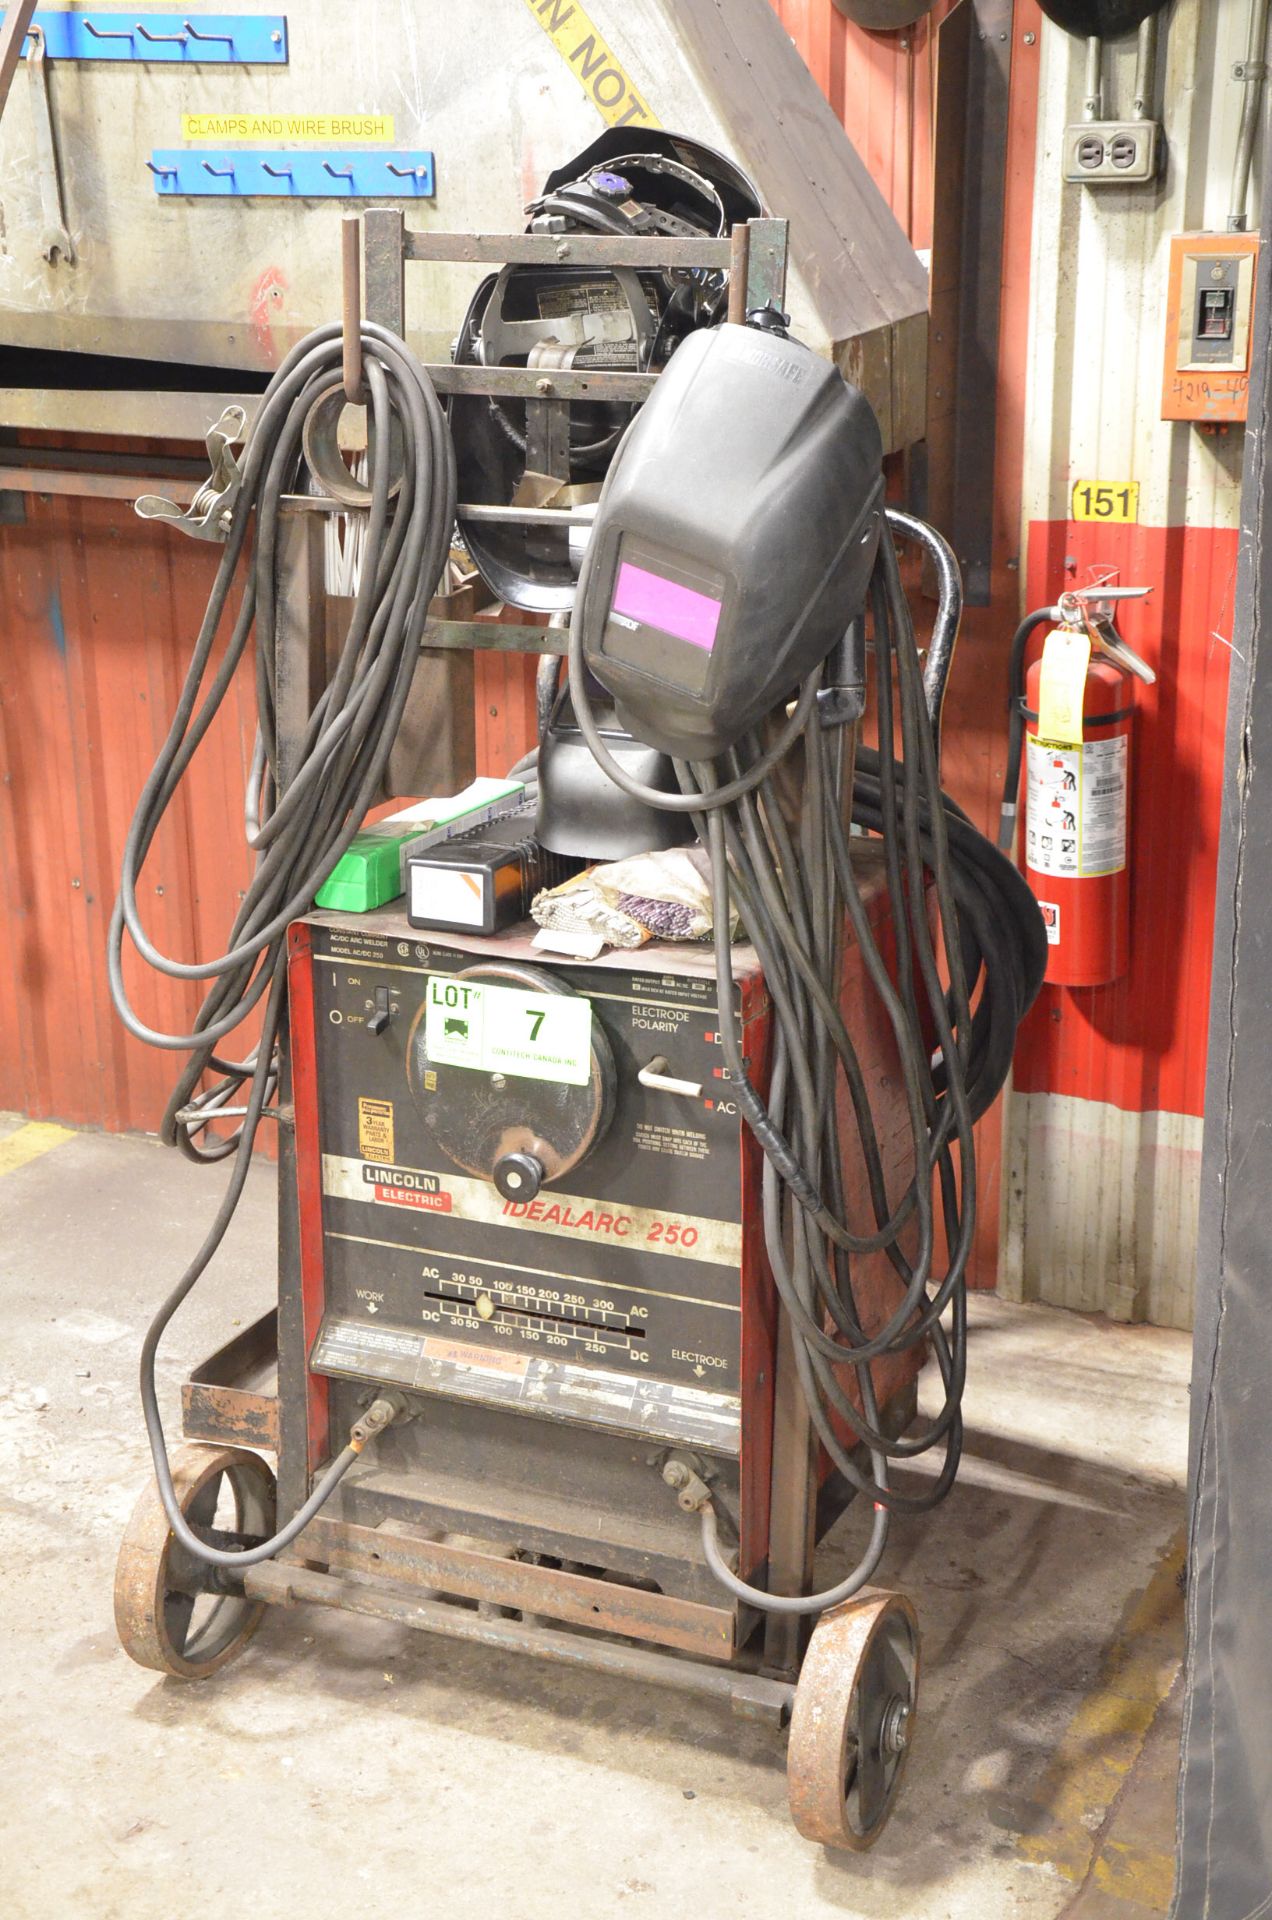 LINCOLN ELECTRIC IDEALARC 250 PORTABLE ARC WELDER WITH CABLES, GUN, AND WELDING SUPPLIES, S/N N/A [ - Image 2 of 4